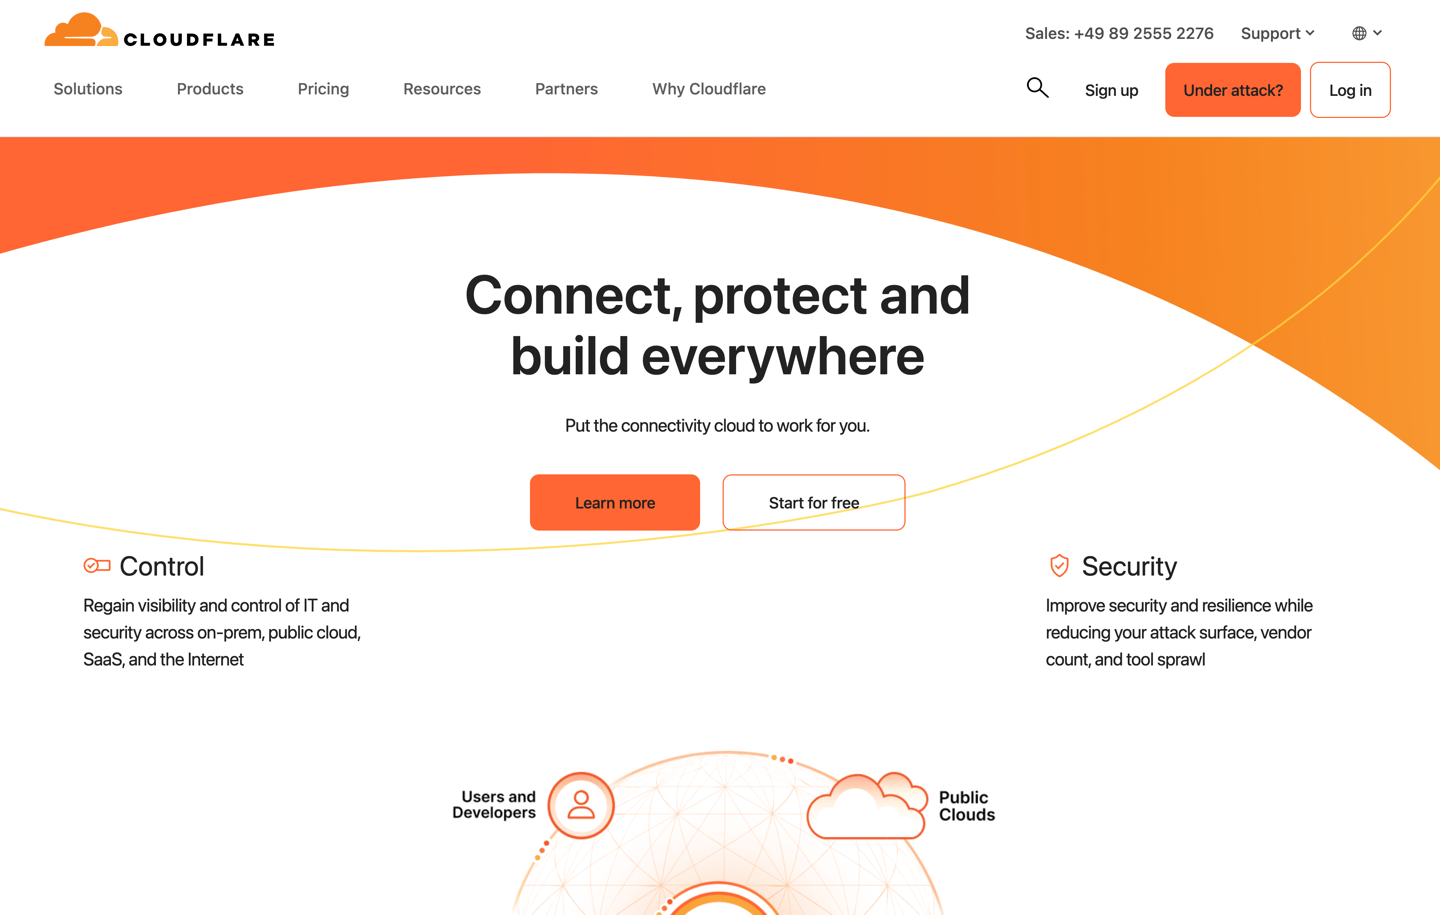 Cloudflare Homepage